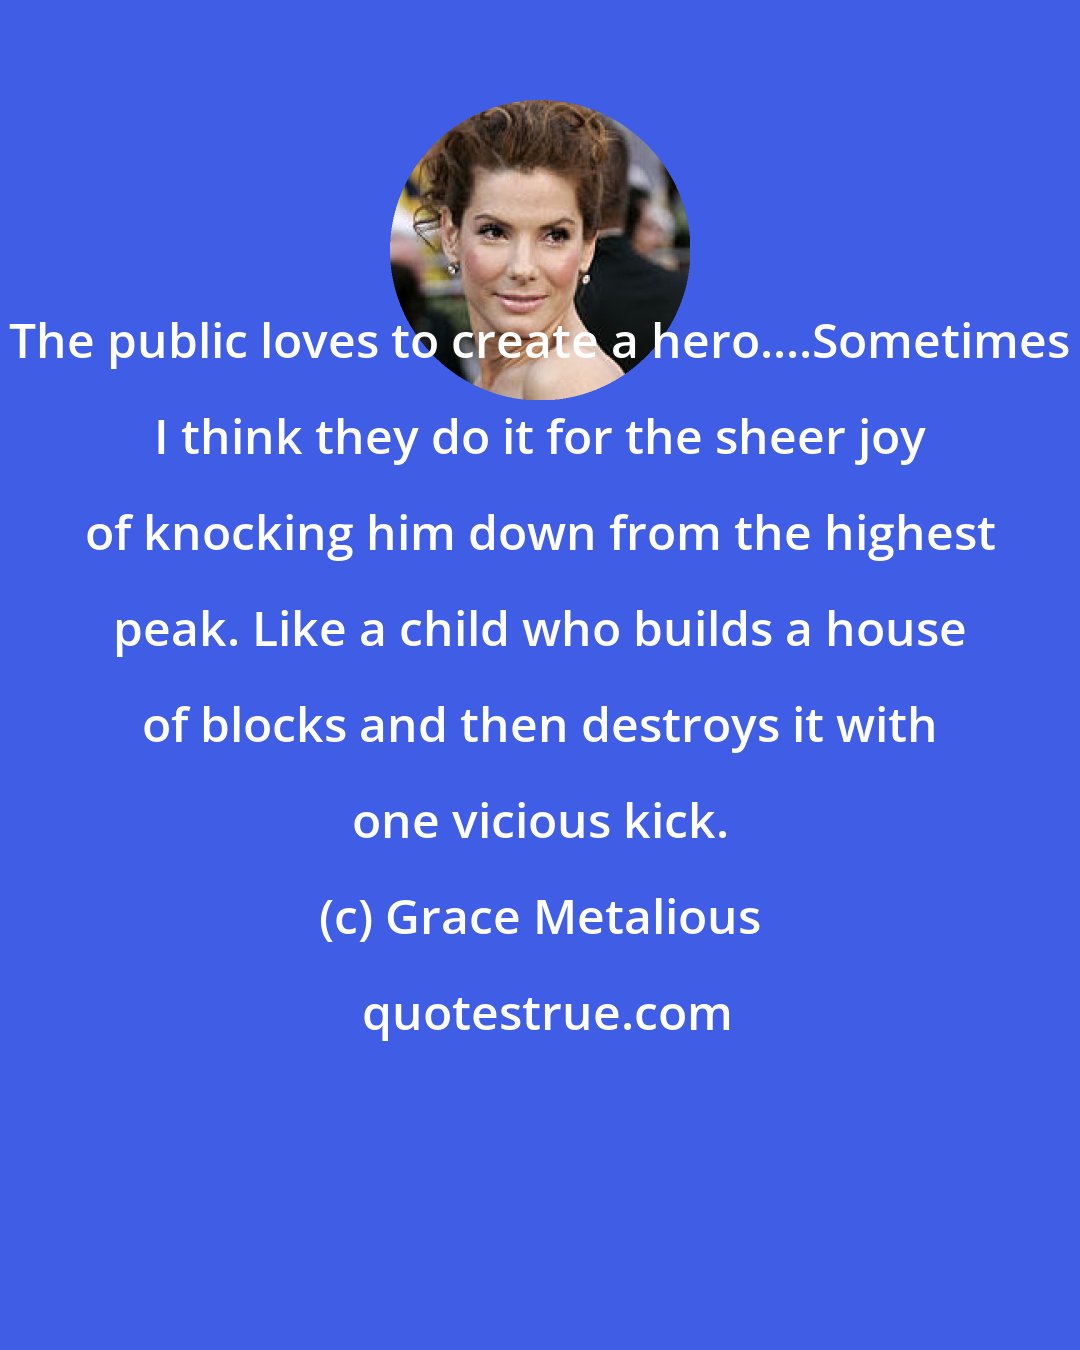 Grace Metalious: The public loves to create a hero....Sometimes I think they do it for the sheer joy of knocking him down from the highest peak. Like a child who builds a house of blocks and then destroys it with one vicious kick.